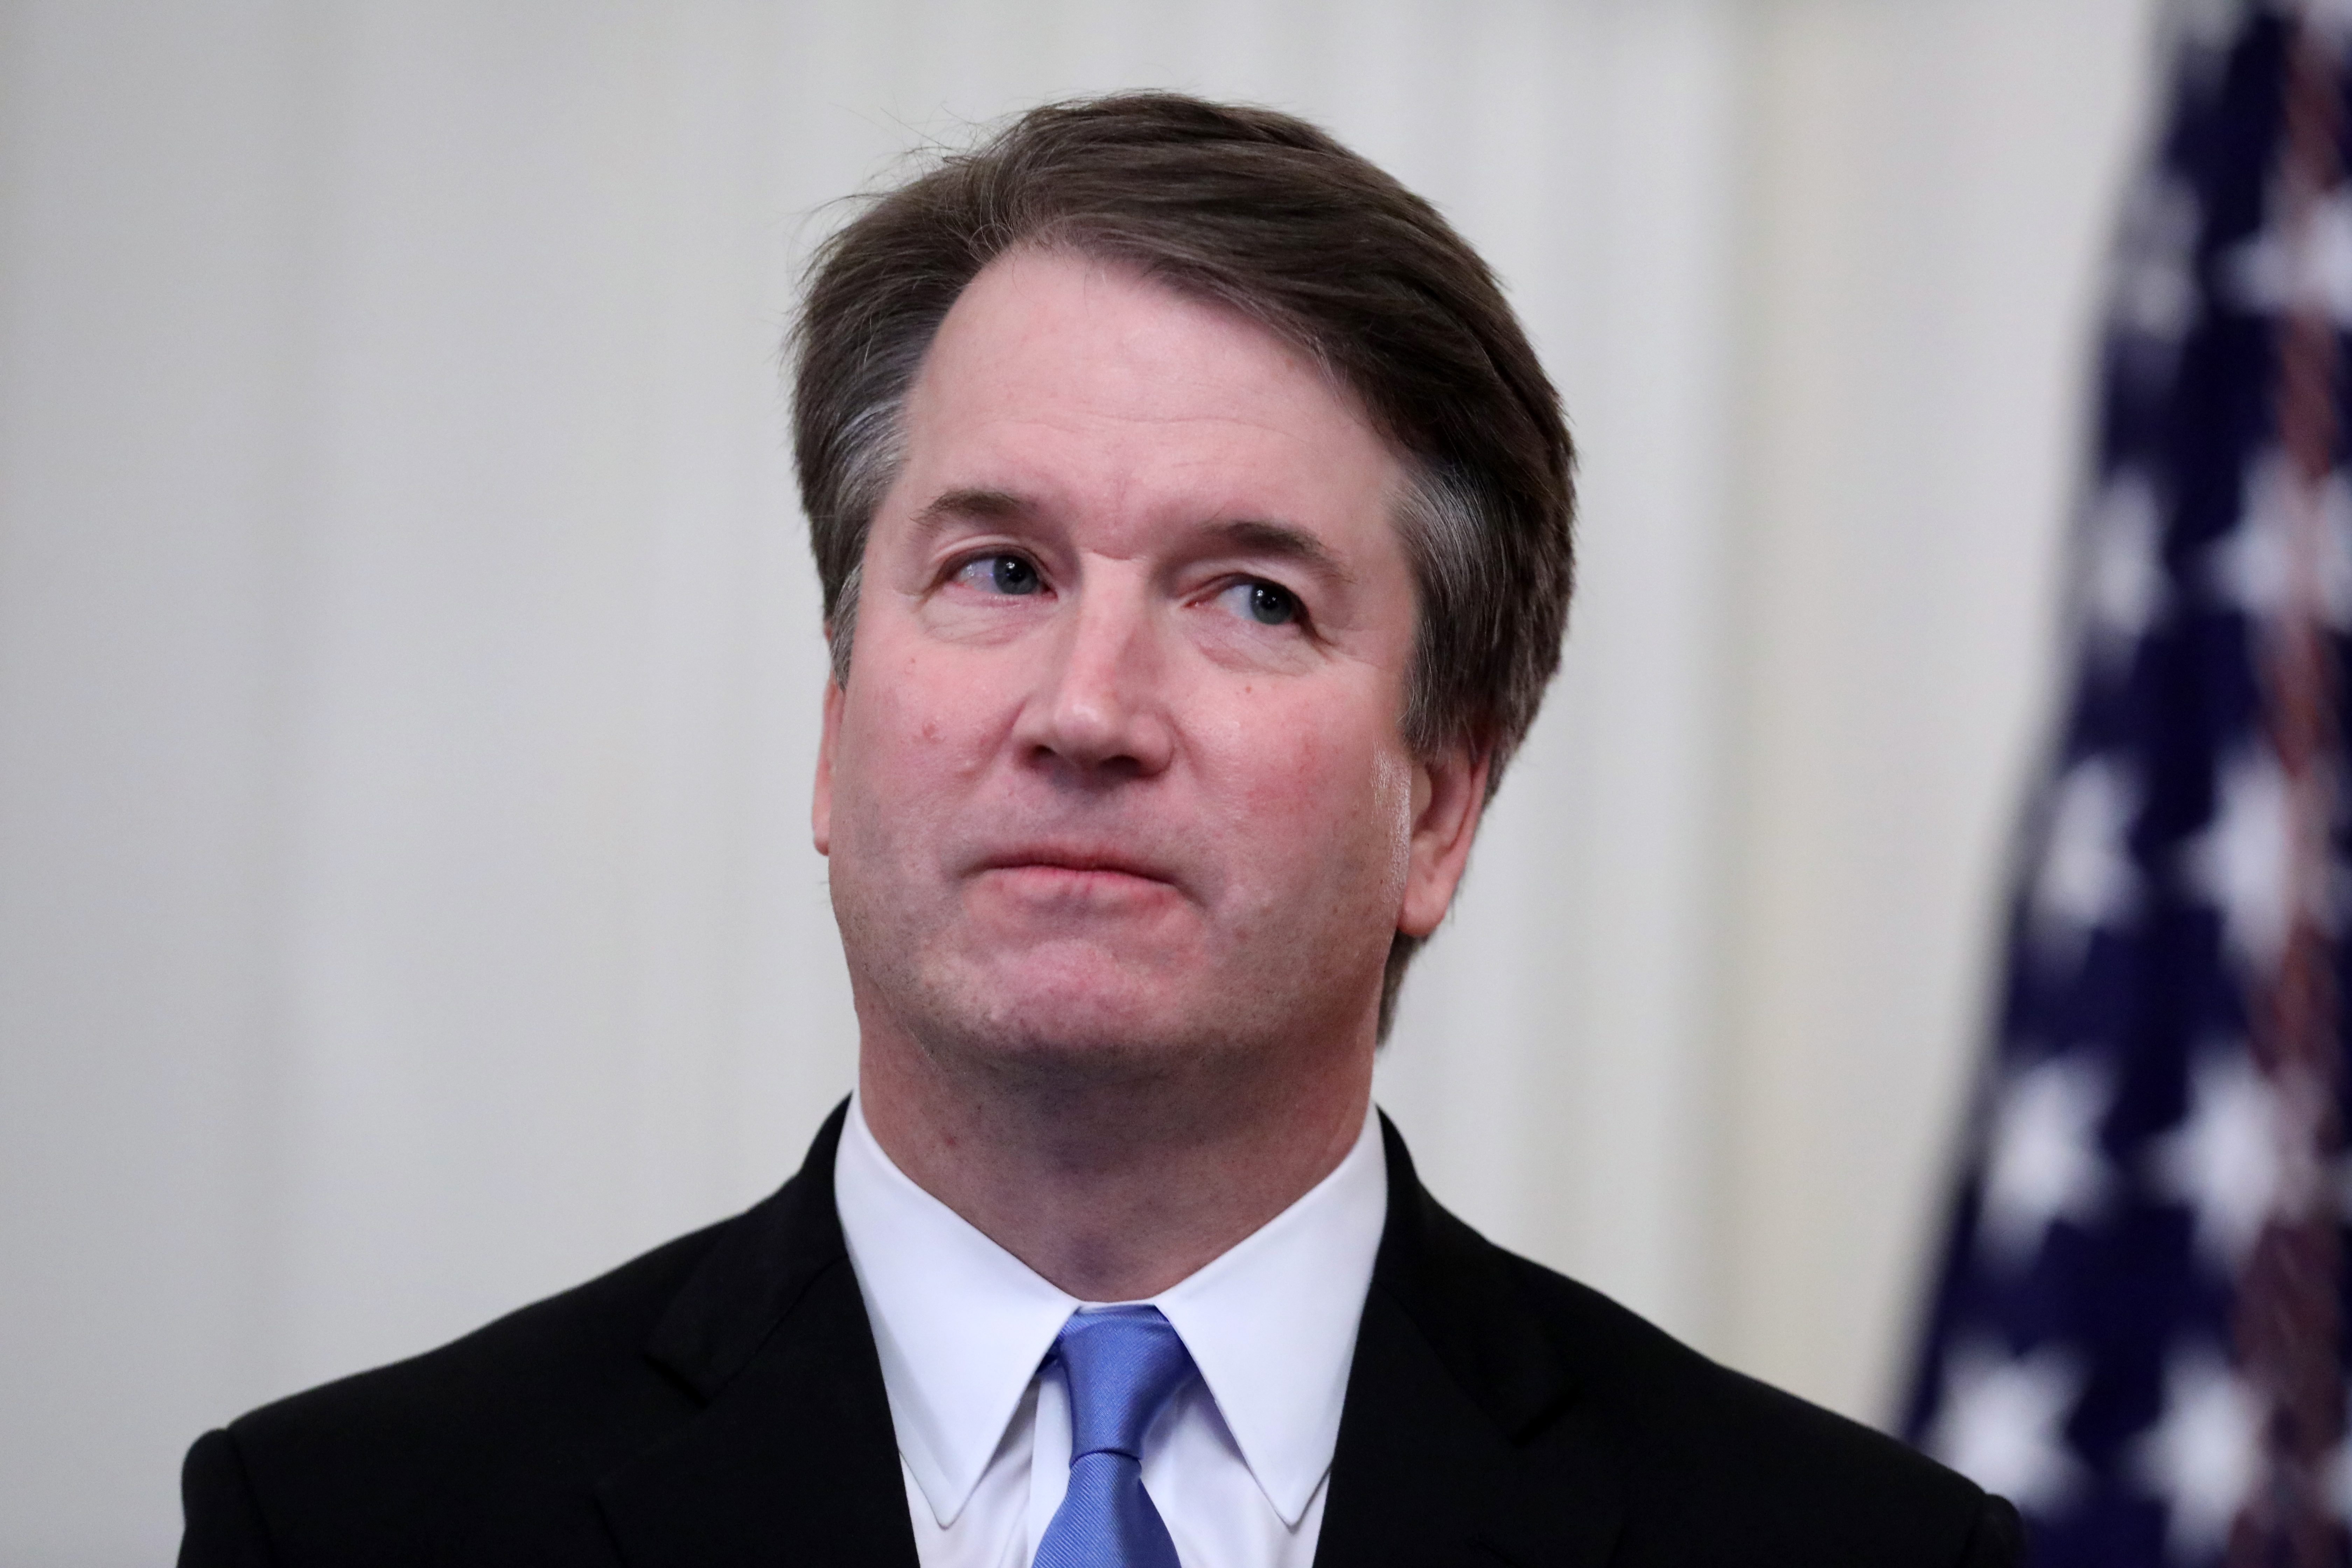 Justice Brett Kavanaugh attends his ceremonial swearing at the White House on October 8, 2018. (Chip Somodevilla/Getty Images)